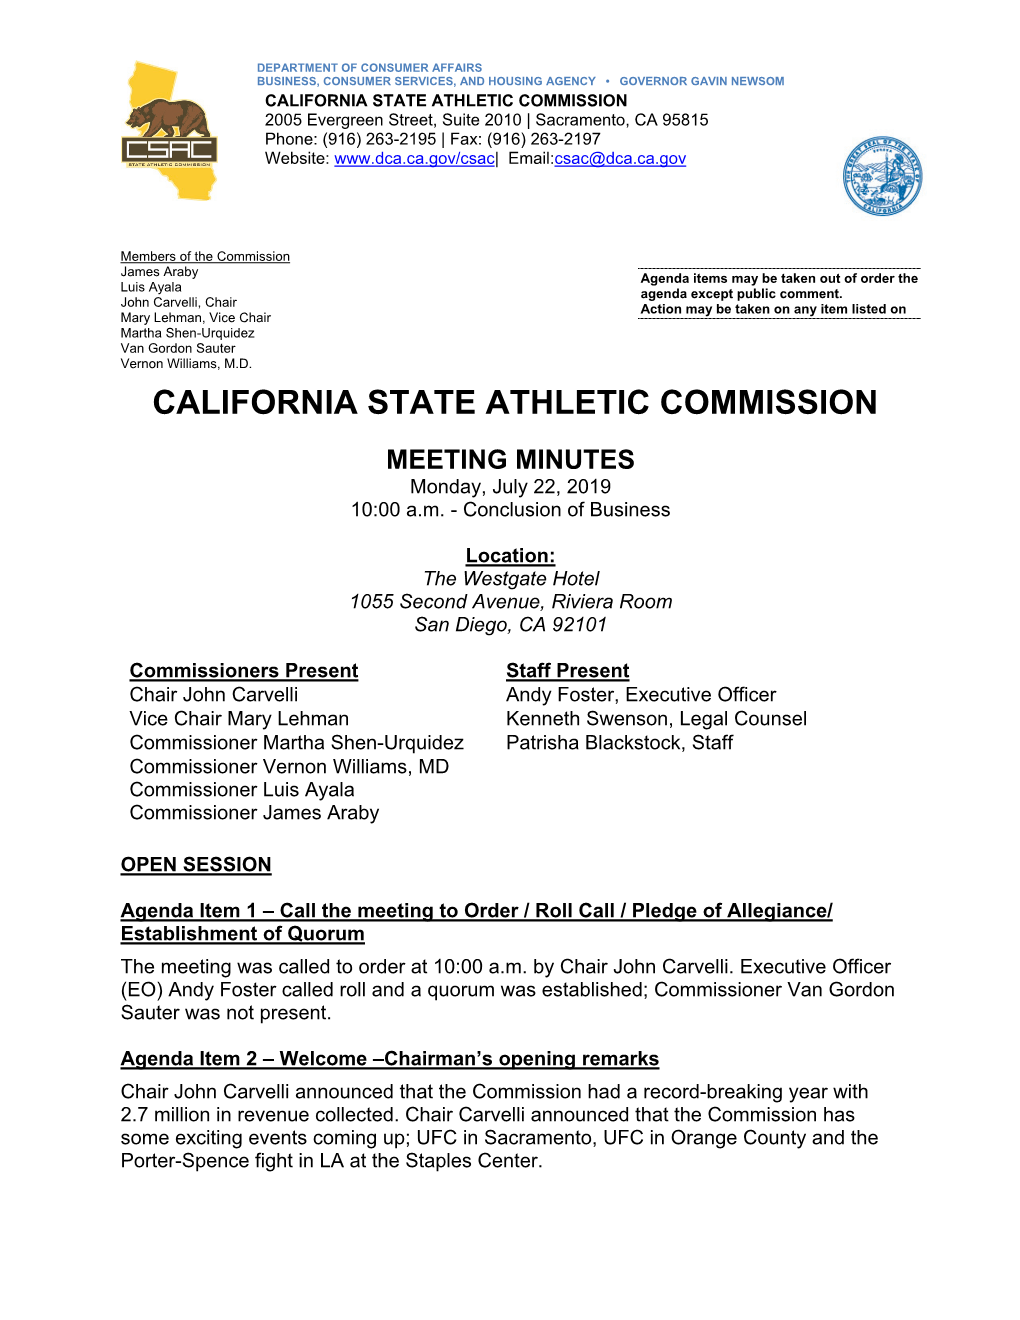 California State Athletic Commission